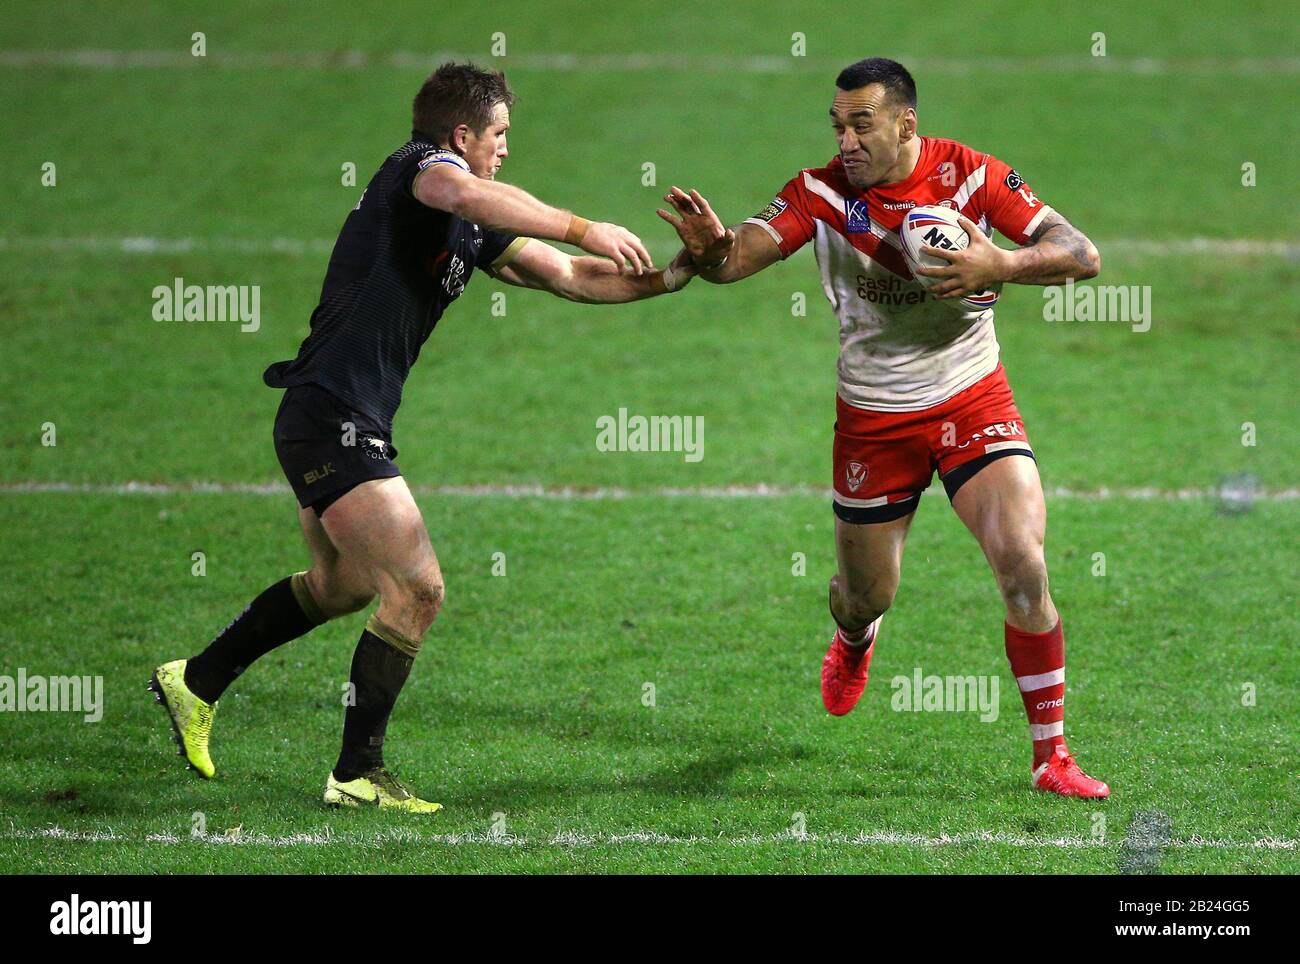 Toronto Wolfpack's Josh McCrone (left) tackles and St Helens' Zeb Taia during the Betfred Super League match at Halliwell Jones Stadium, Warrington. Stock Photo